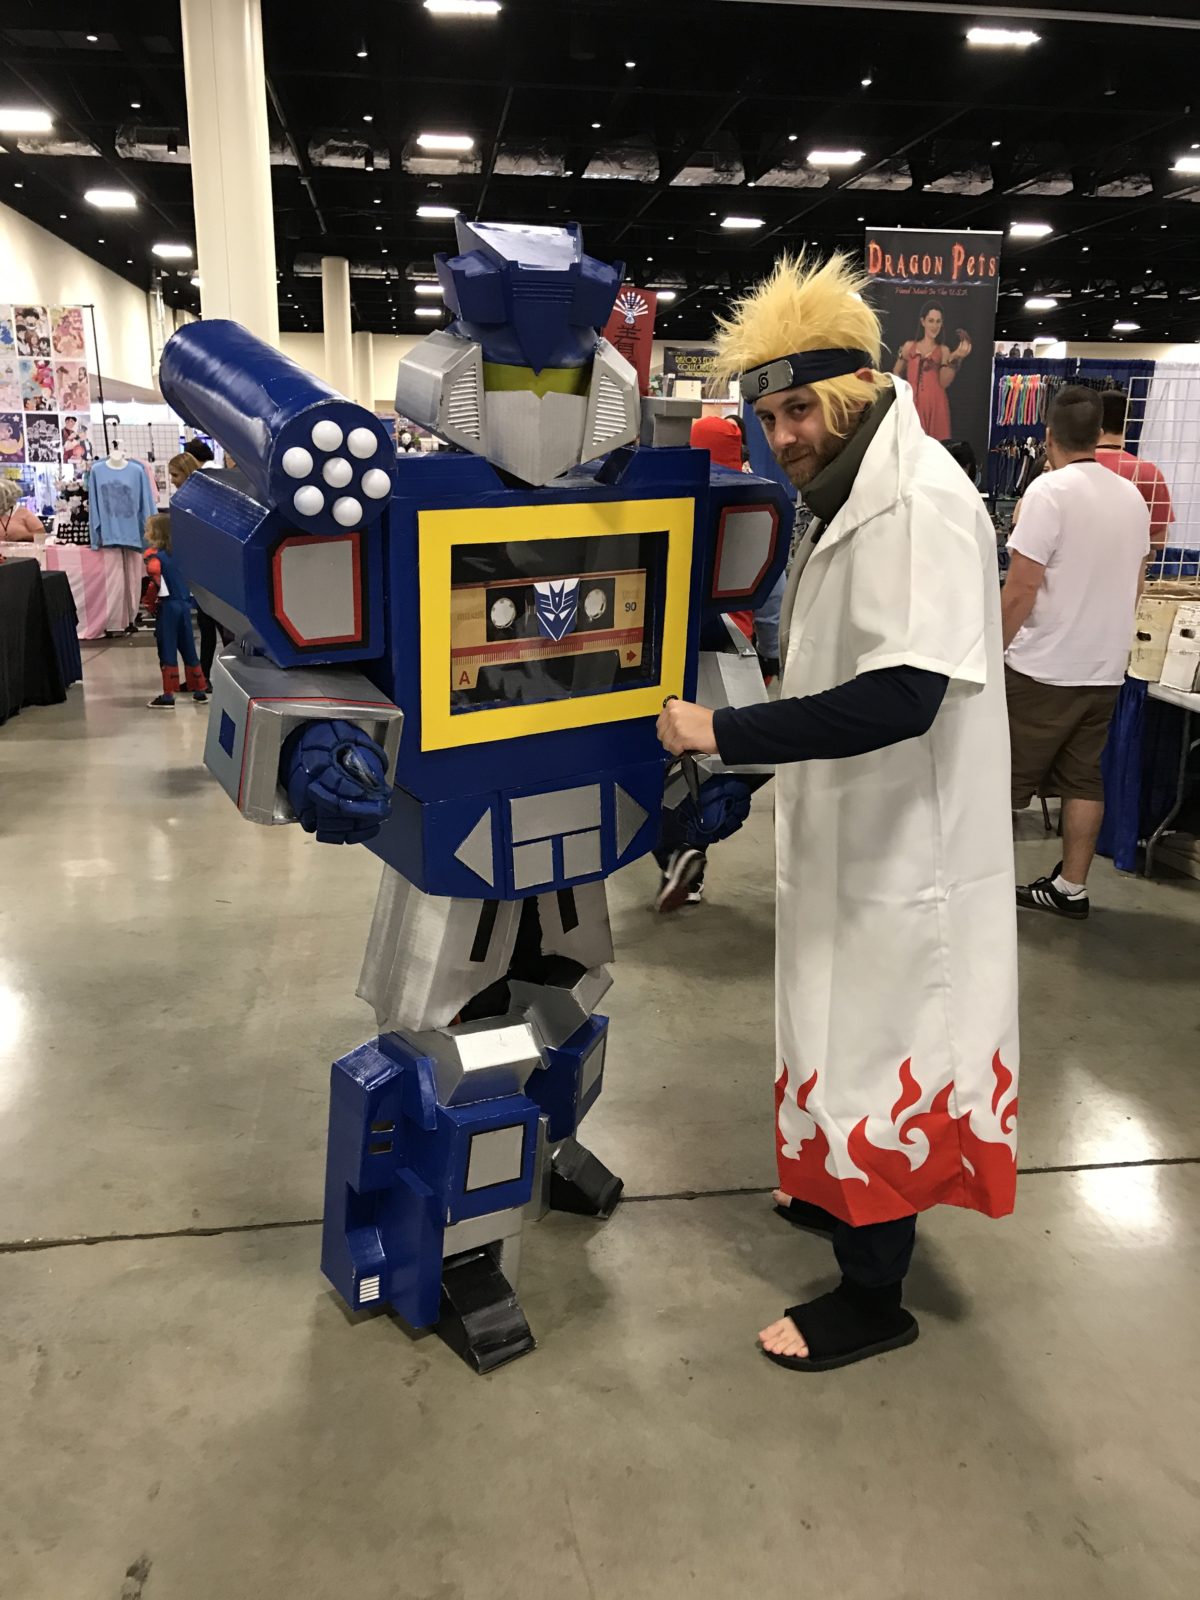 SUPER CosViews from Fort Lauderdale SUPERCON:  Had some GREAT SOUNDWAVES